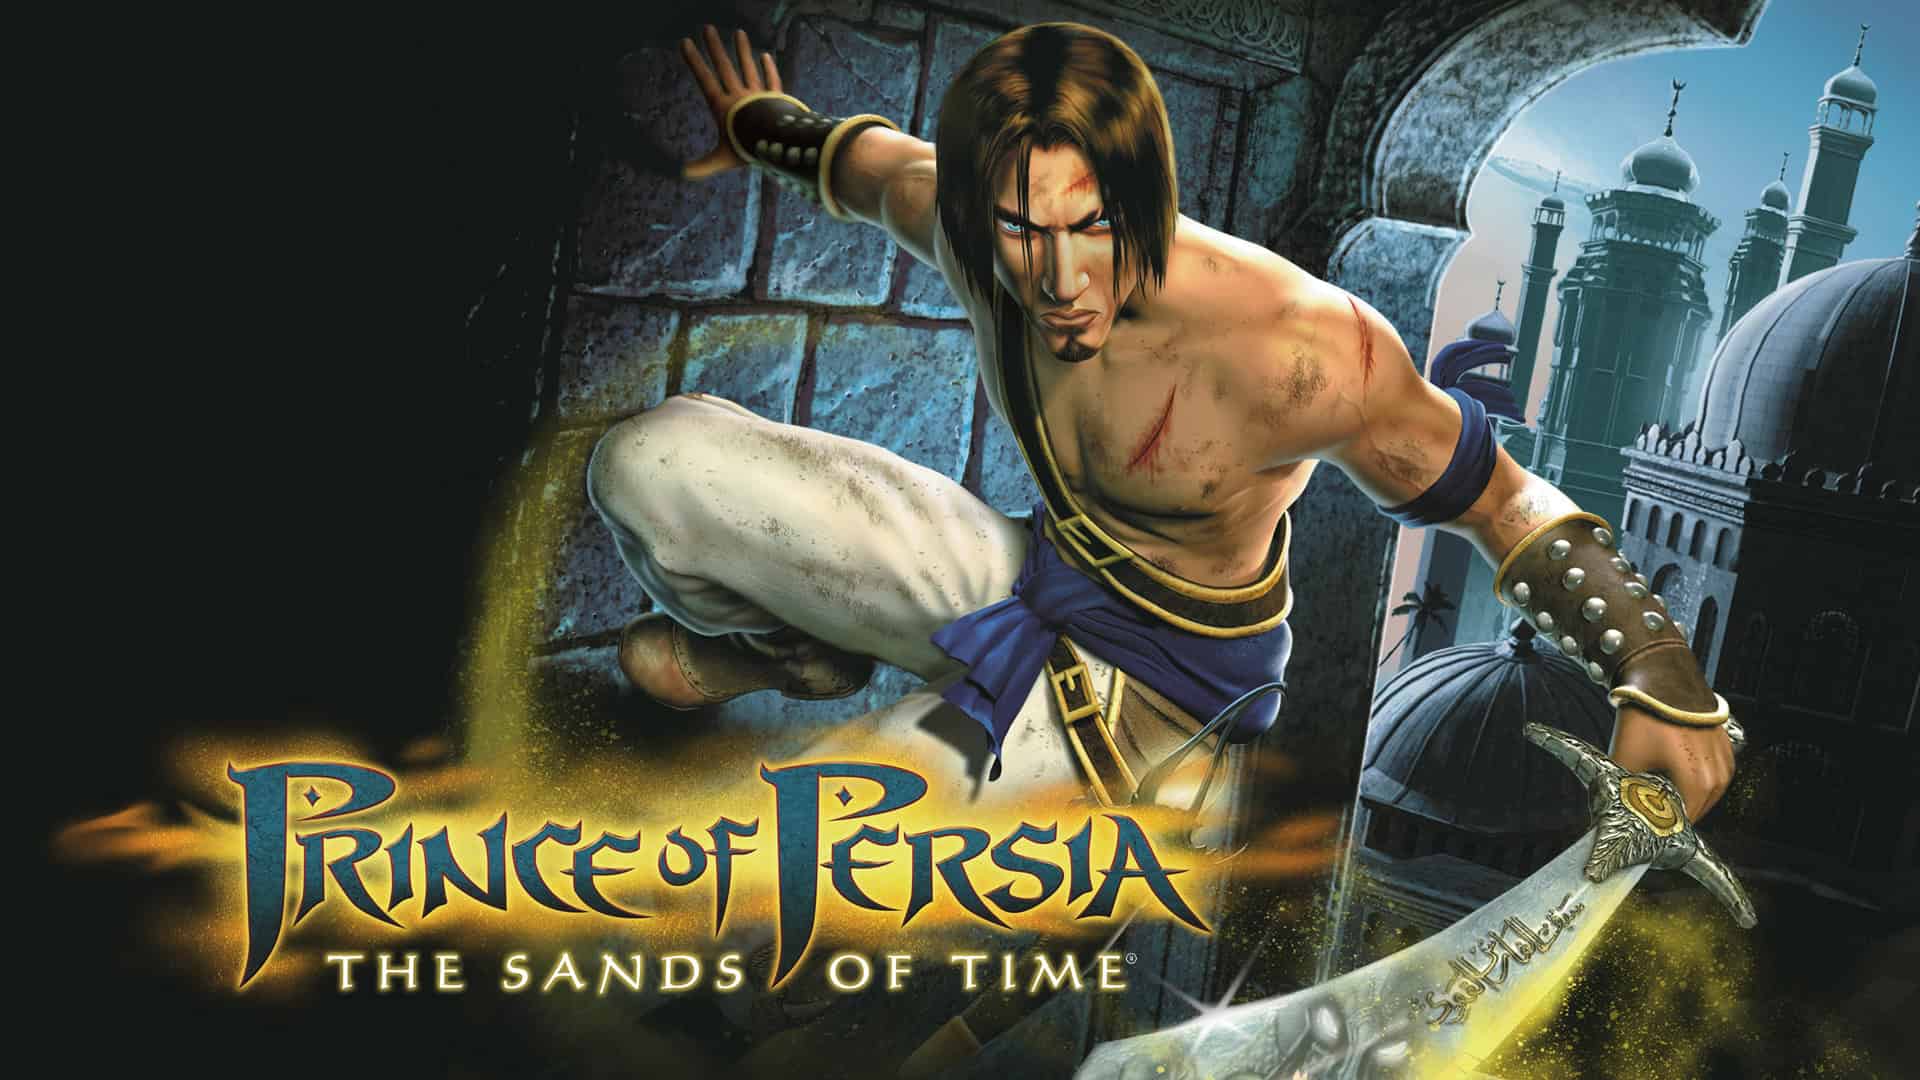 Ubisoft Toronto and Montreal Team Up for Prince of Persia: The Sands of Time Remake